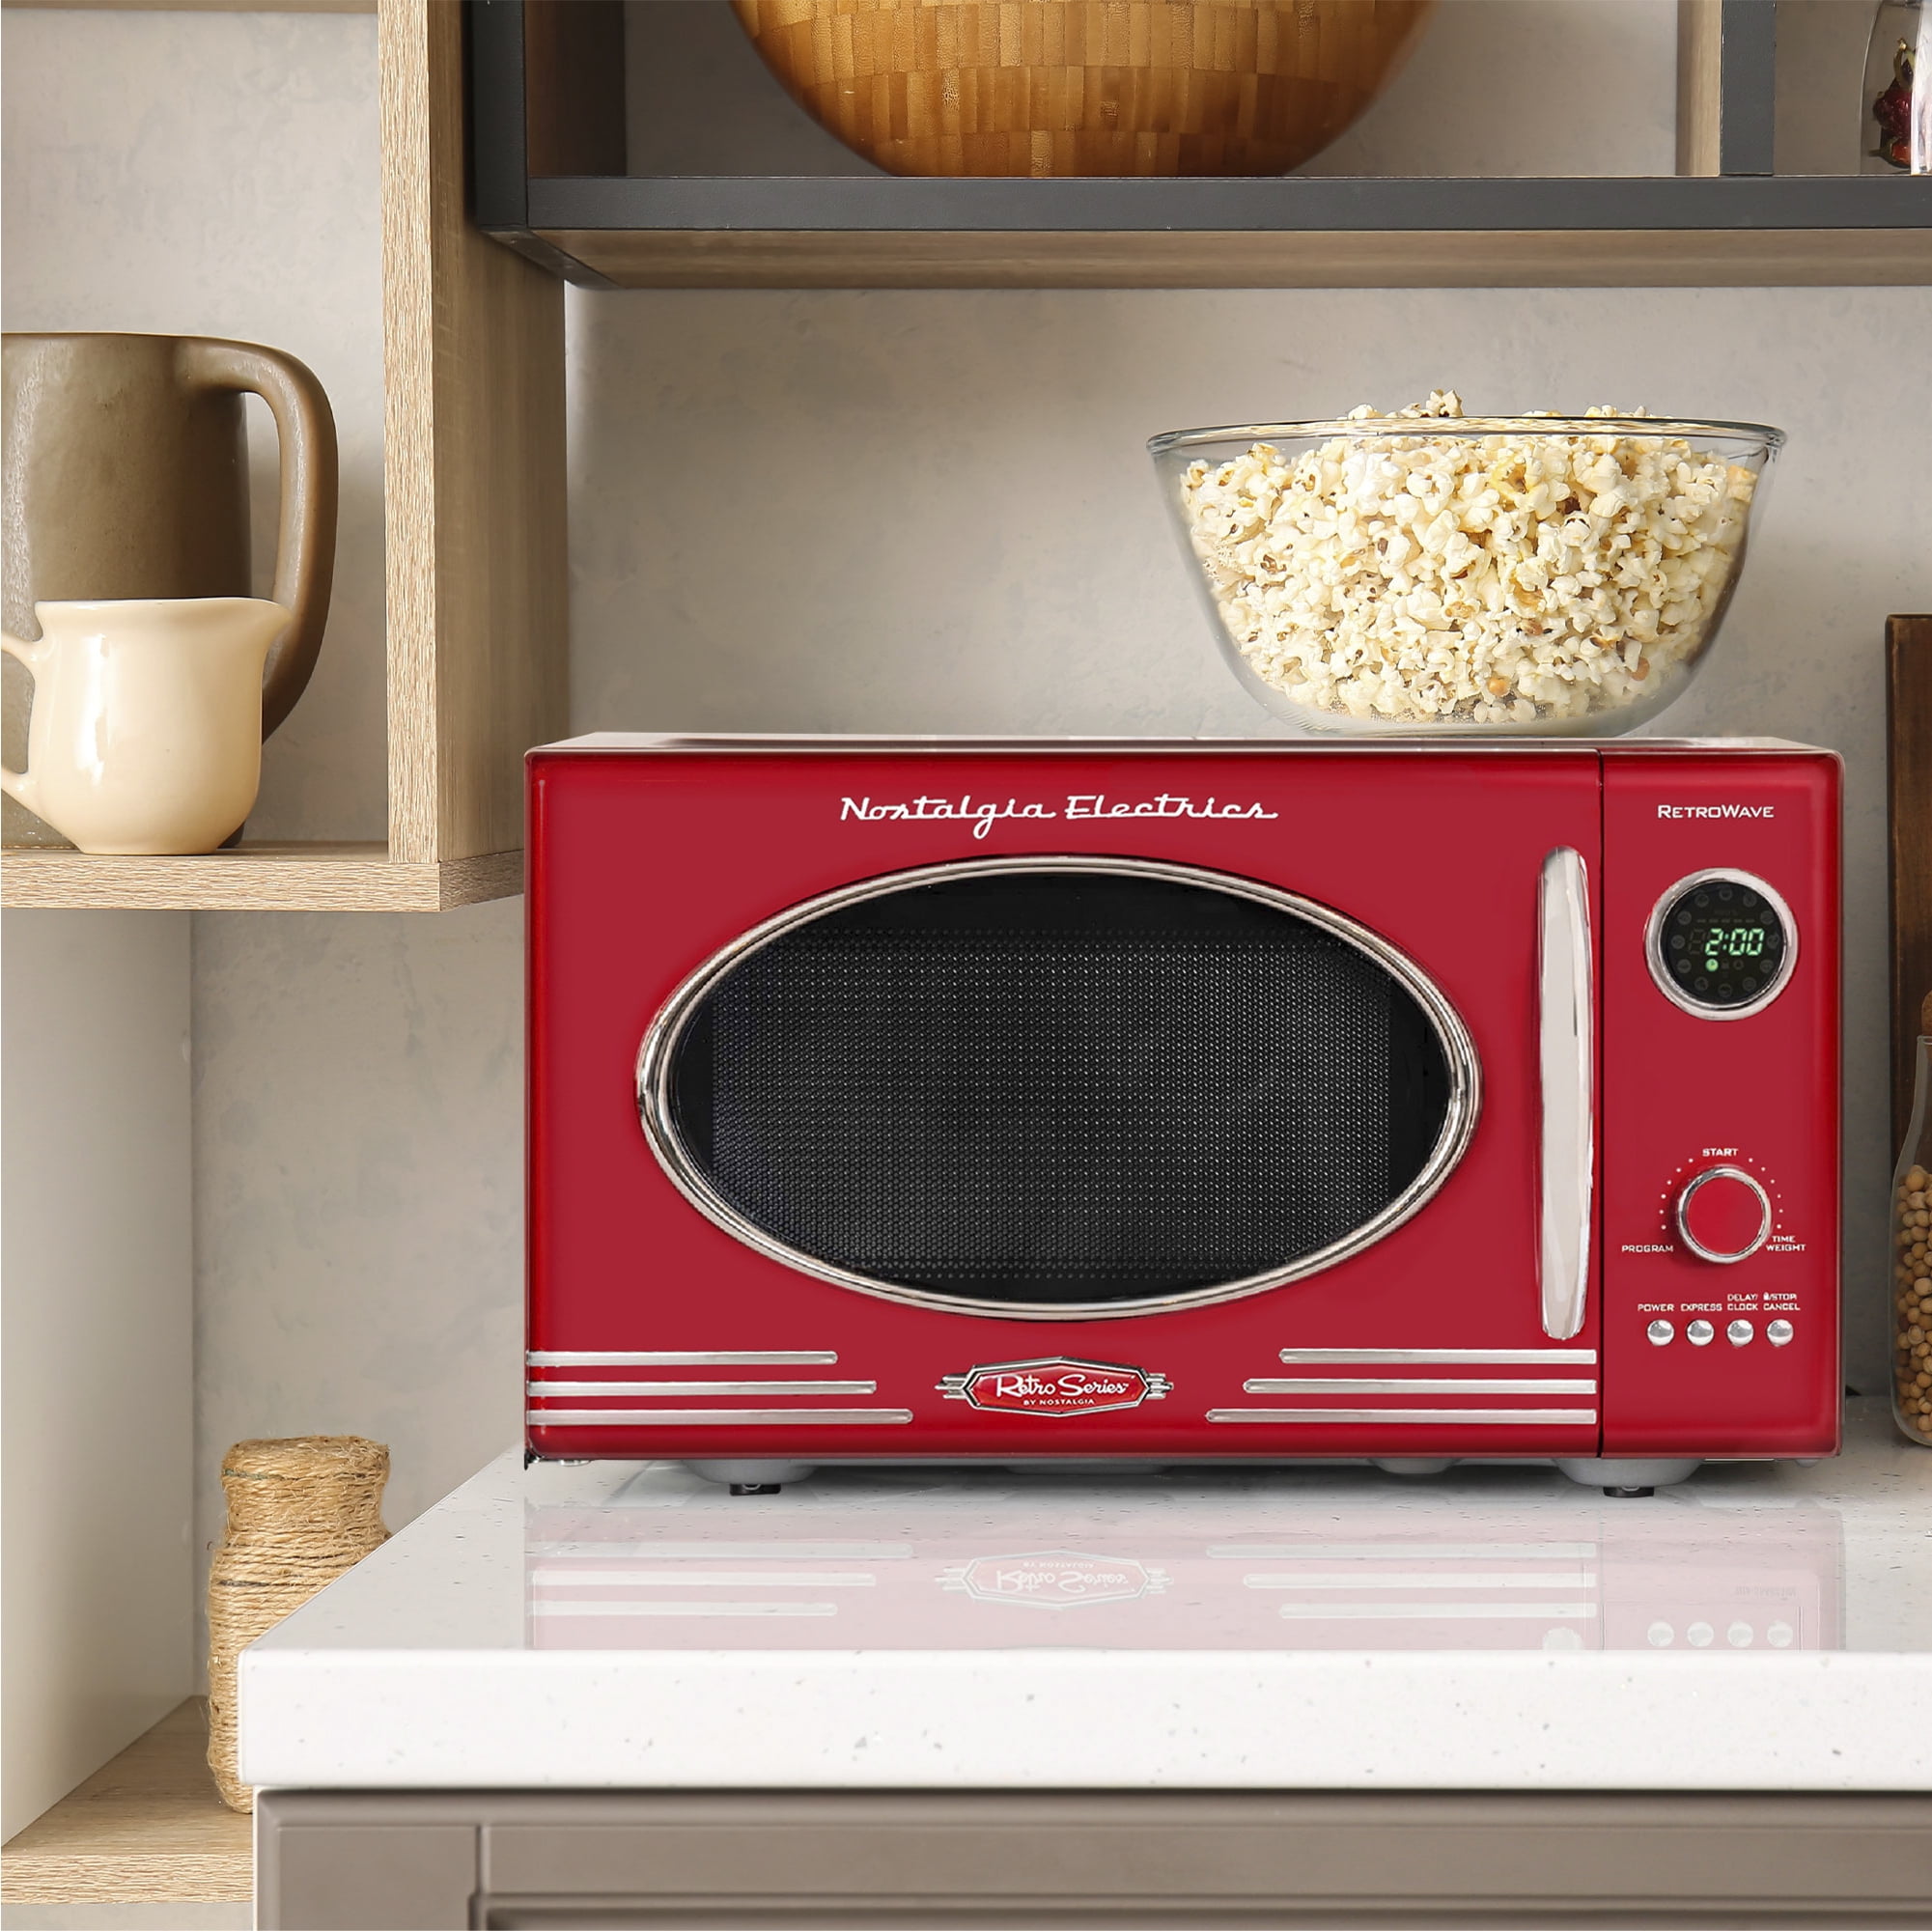 Rewrite history with a retro microwave - CNET